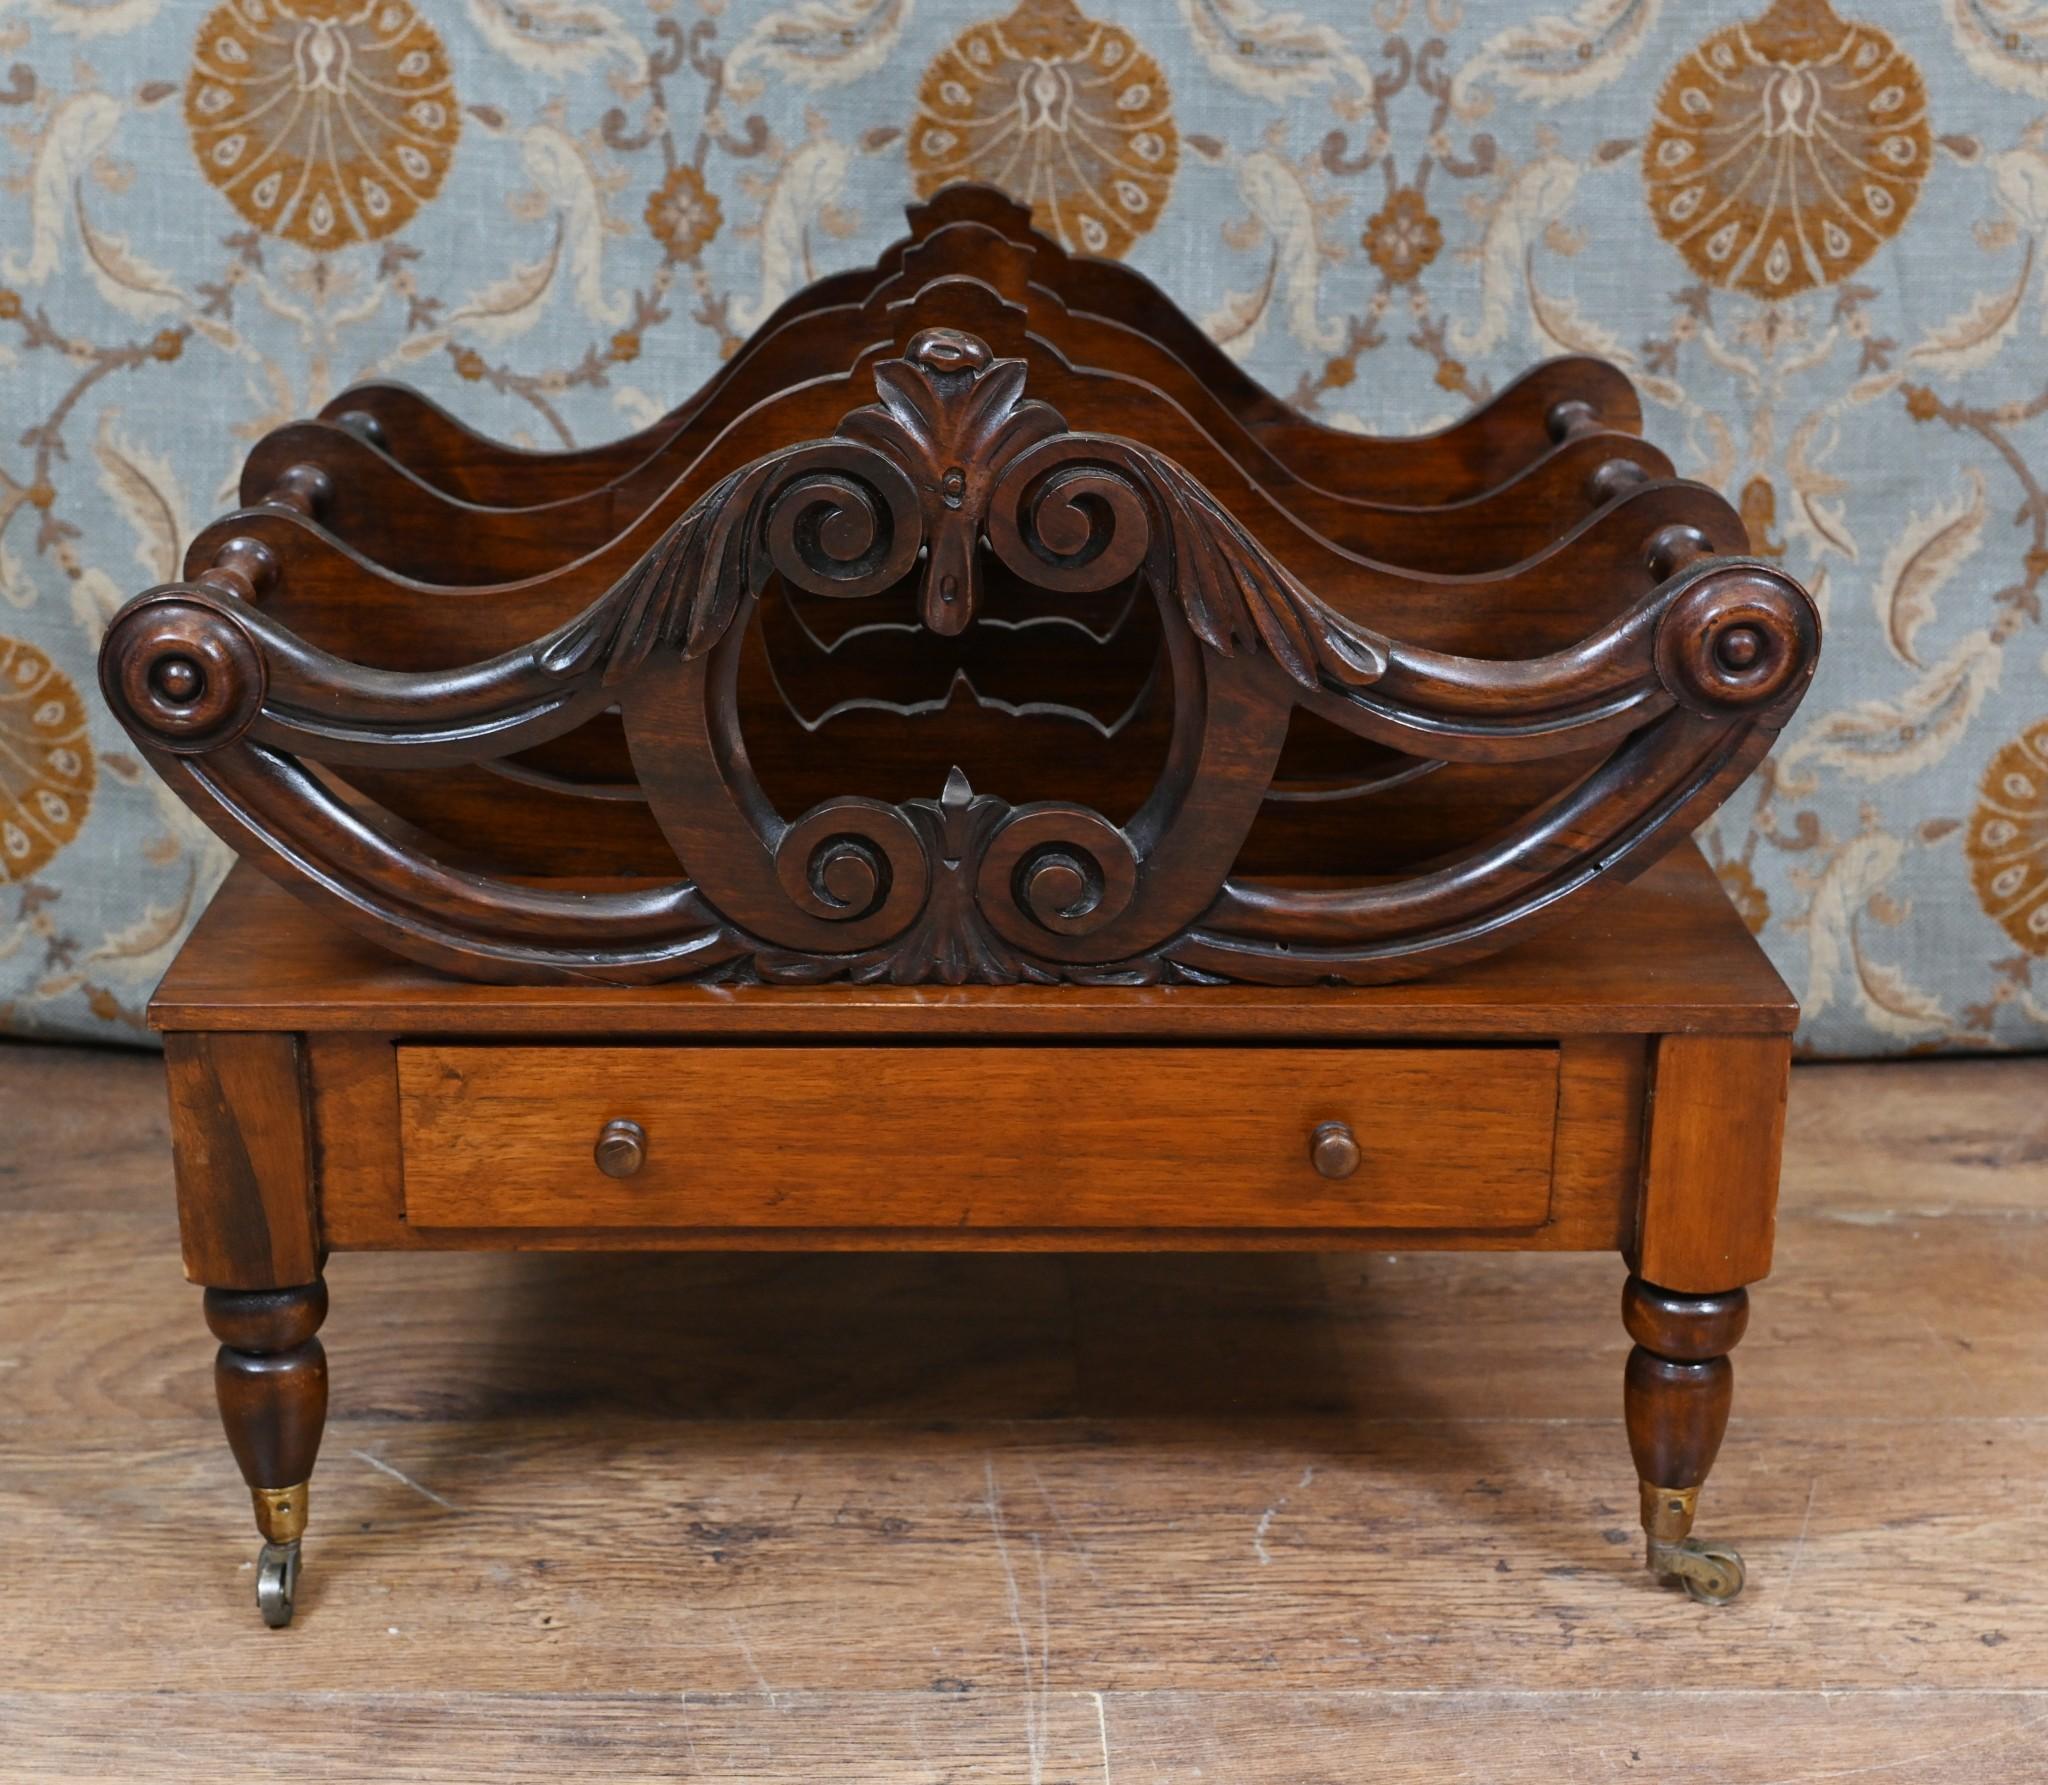 Gorgeous William IV canterbury in mahogany
An antique Canterbury refers to a piece of furniture designed to hold sheet music, magazines, or newspapers
Circa 1810 on this piece
Viewings available by appointment
Offered in great shape ready for home